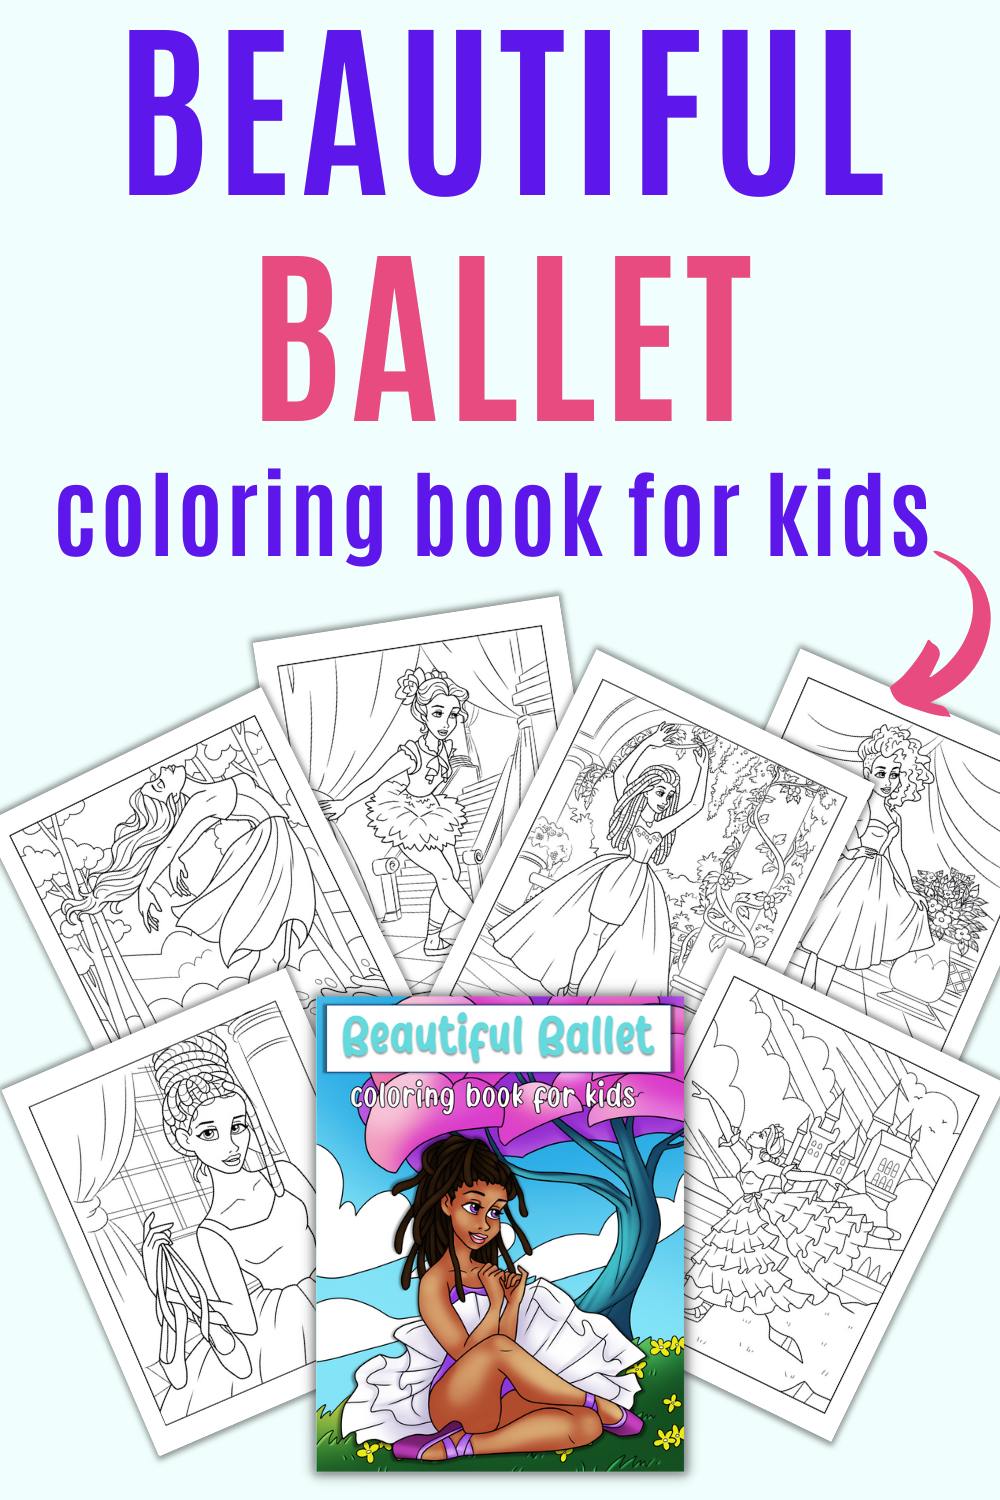 Text "beautiful ballet coloring book for kids"